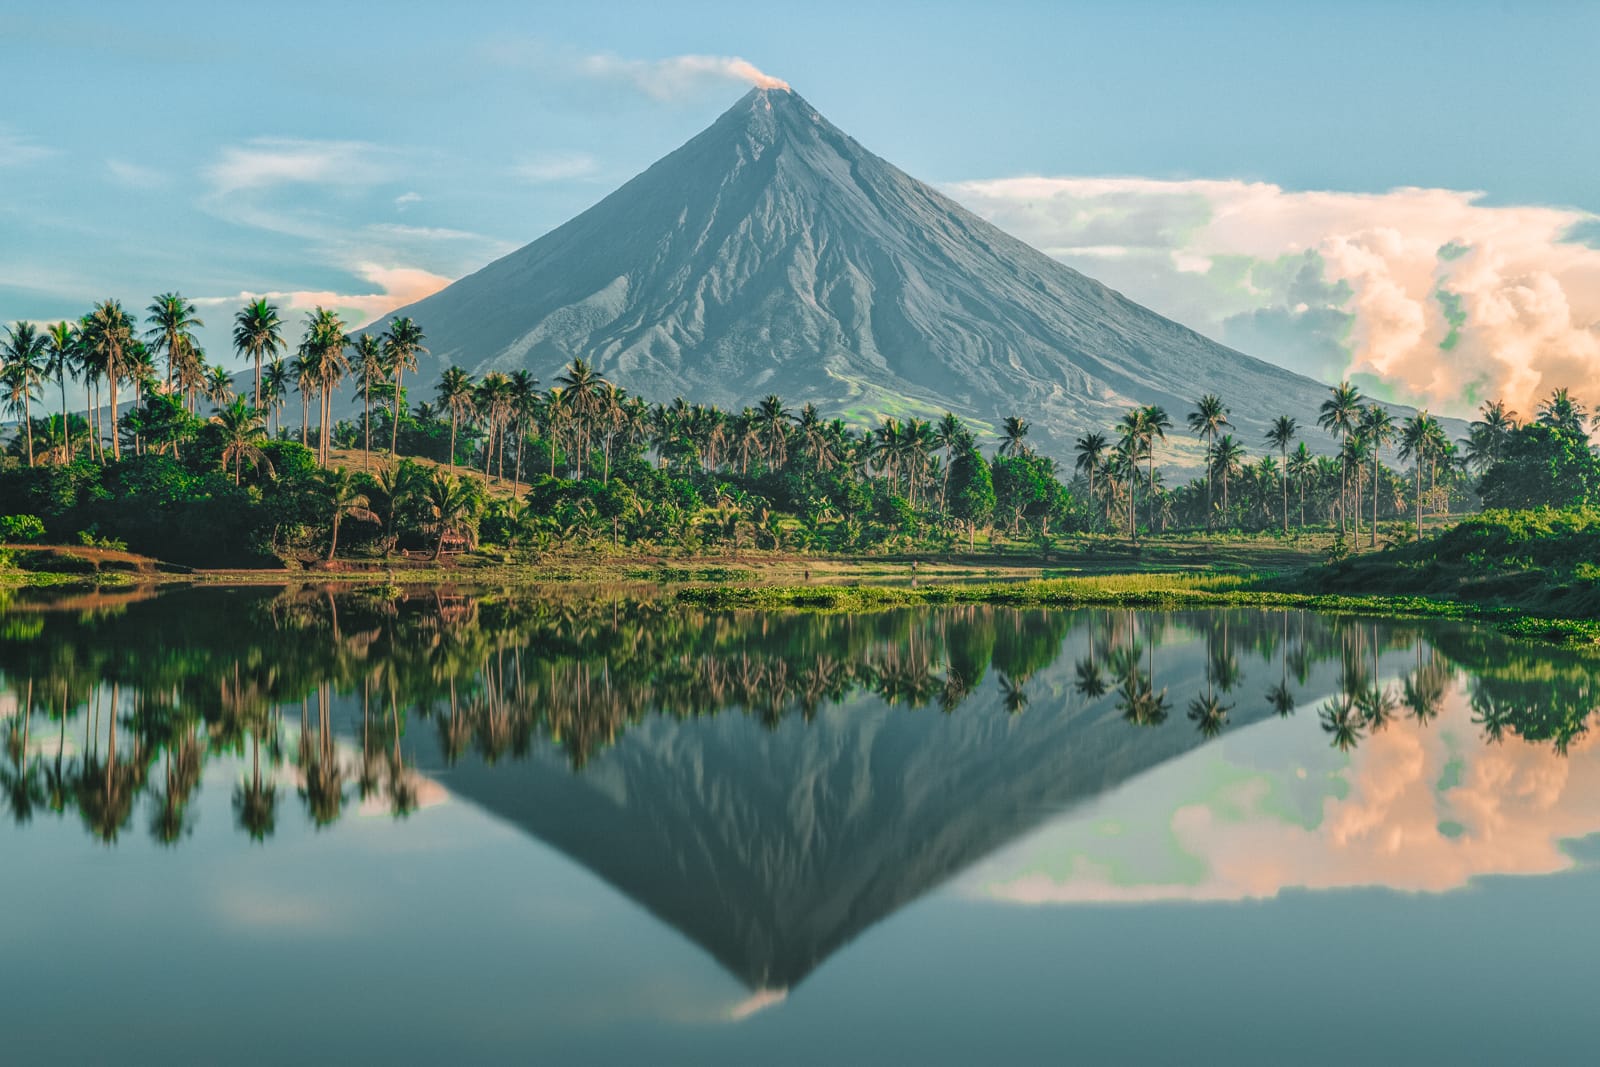 10 Top Tourist Attractions in the Philippines